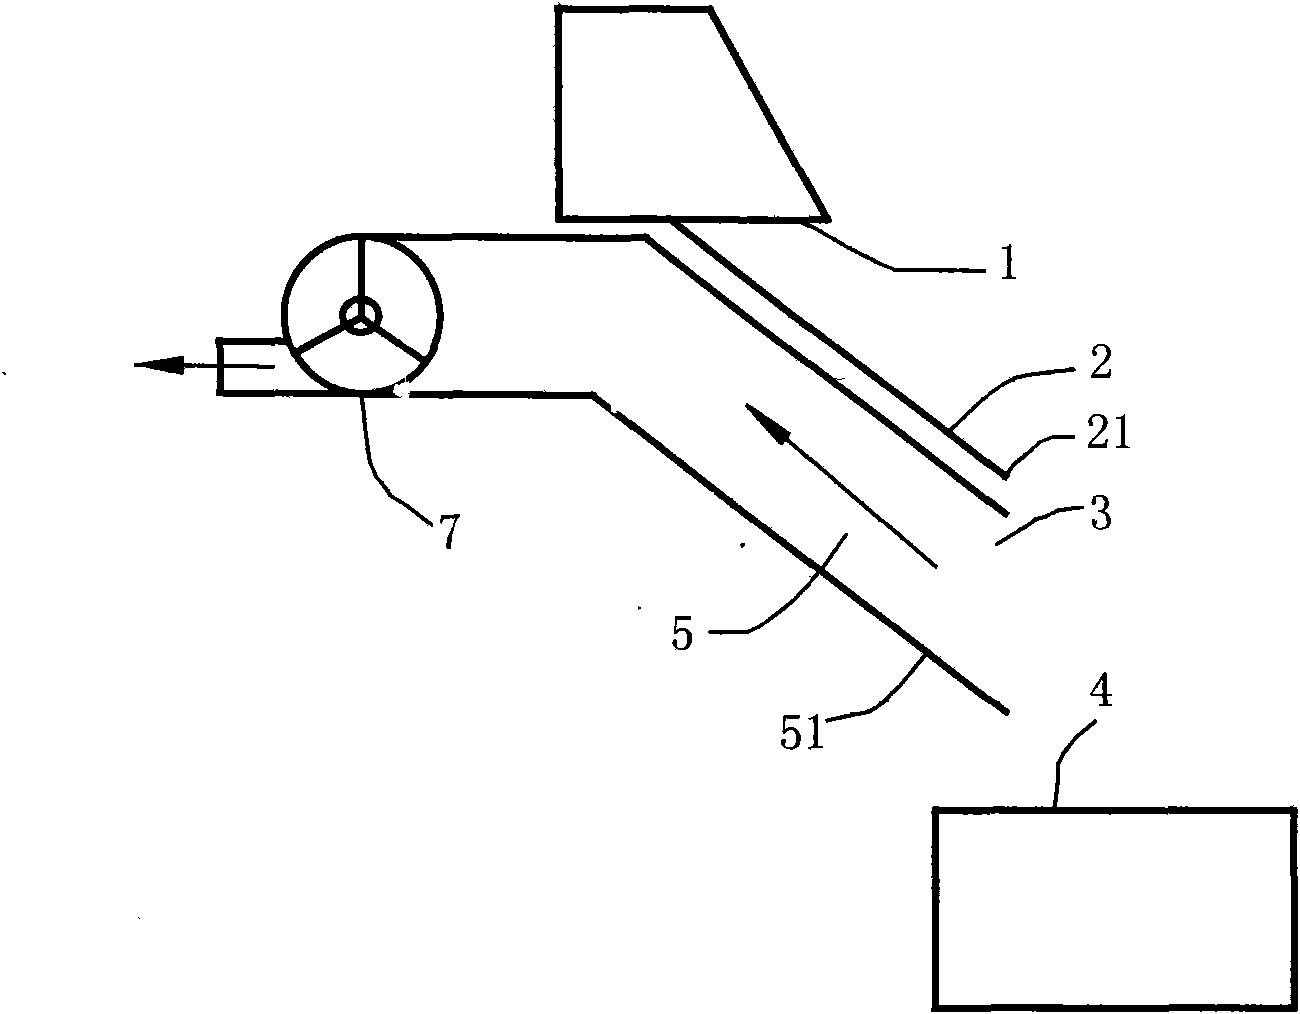 Oblique winnowing device of reaping machine